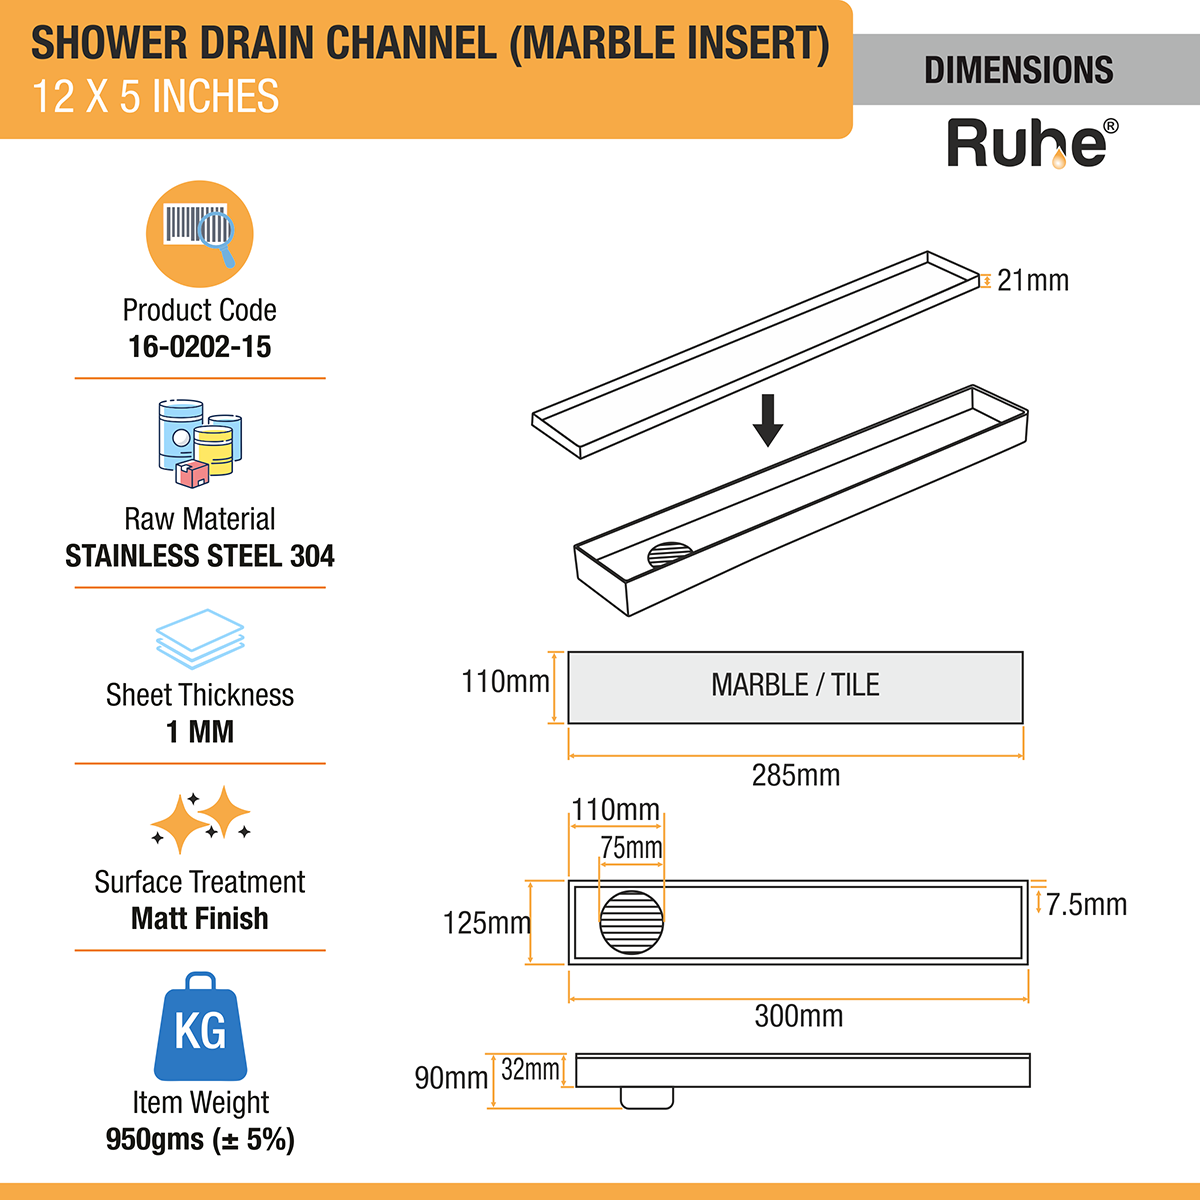 Marble Insert Shower Drain Channel (12 x 5 Inches) with Cockroach Trap (304 Grade) dimensions and size